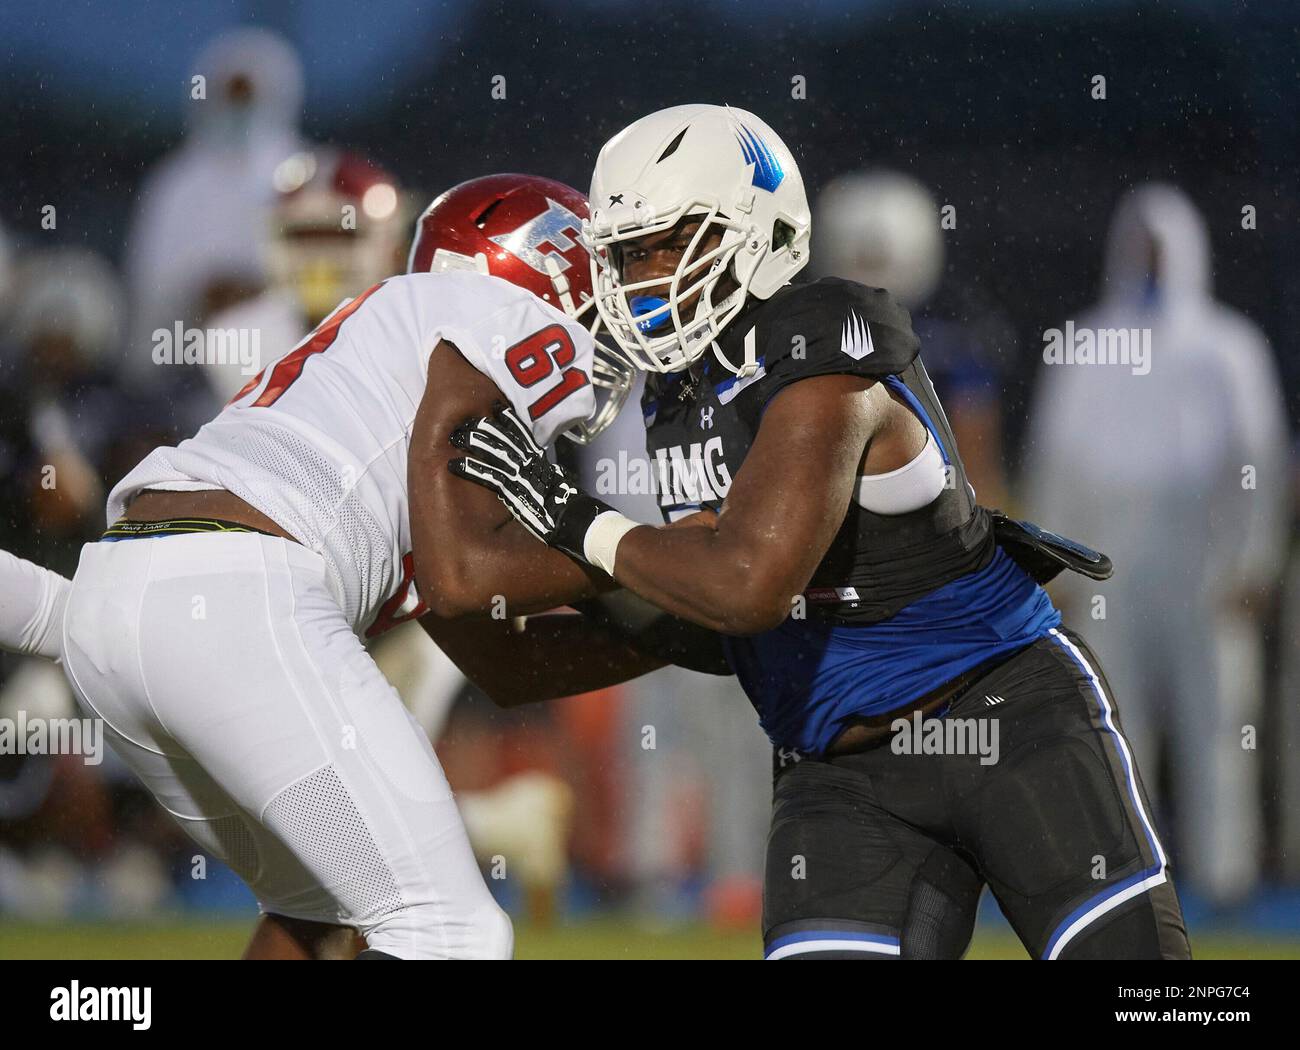 IMG Ascenders defensive end Marlin Dean (56) rushes against offensive tackle  Dante Finley (61) during a Varsity football game against the Edgewater  Eagles on Sep.,17, 2020 in Bradenton, Florida. (Mike Janes/Four Seam